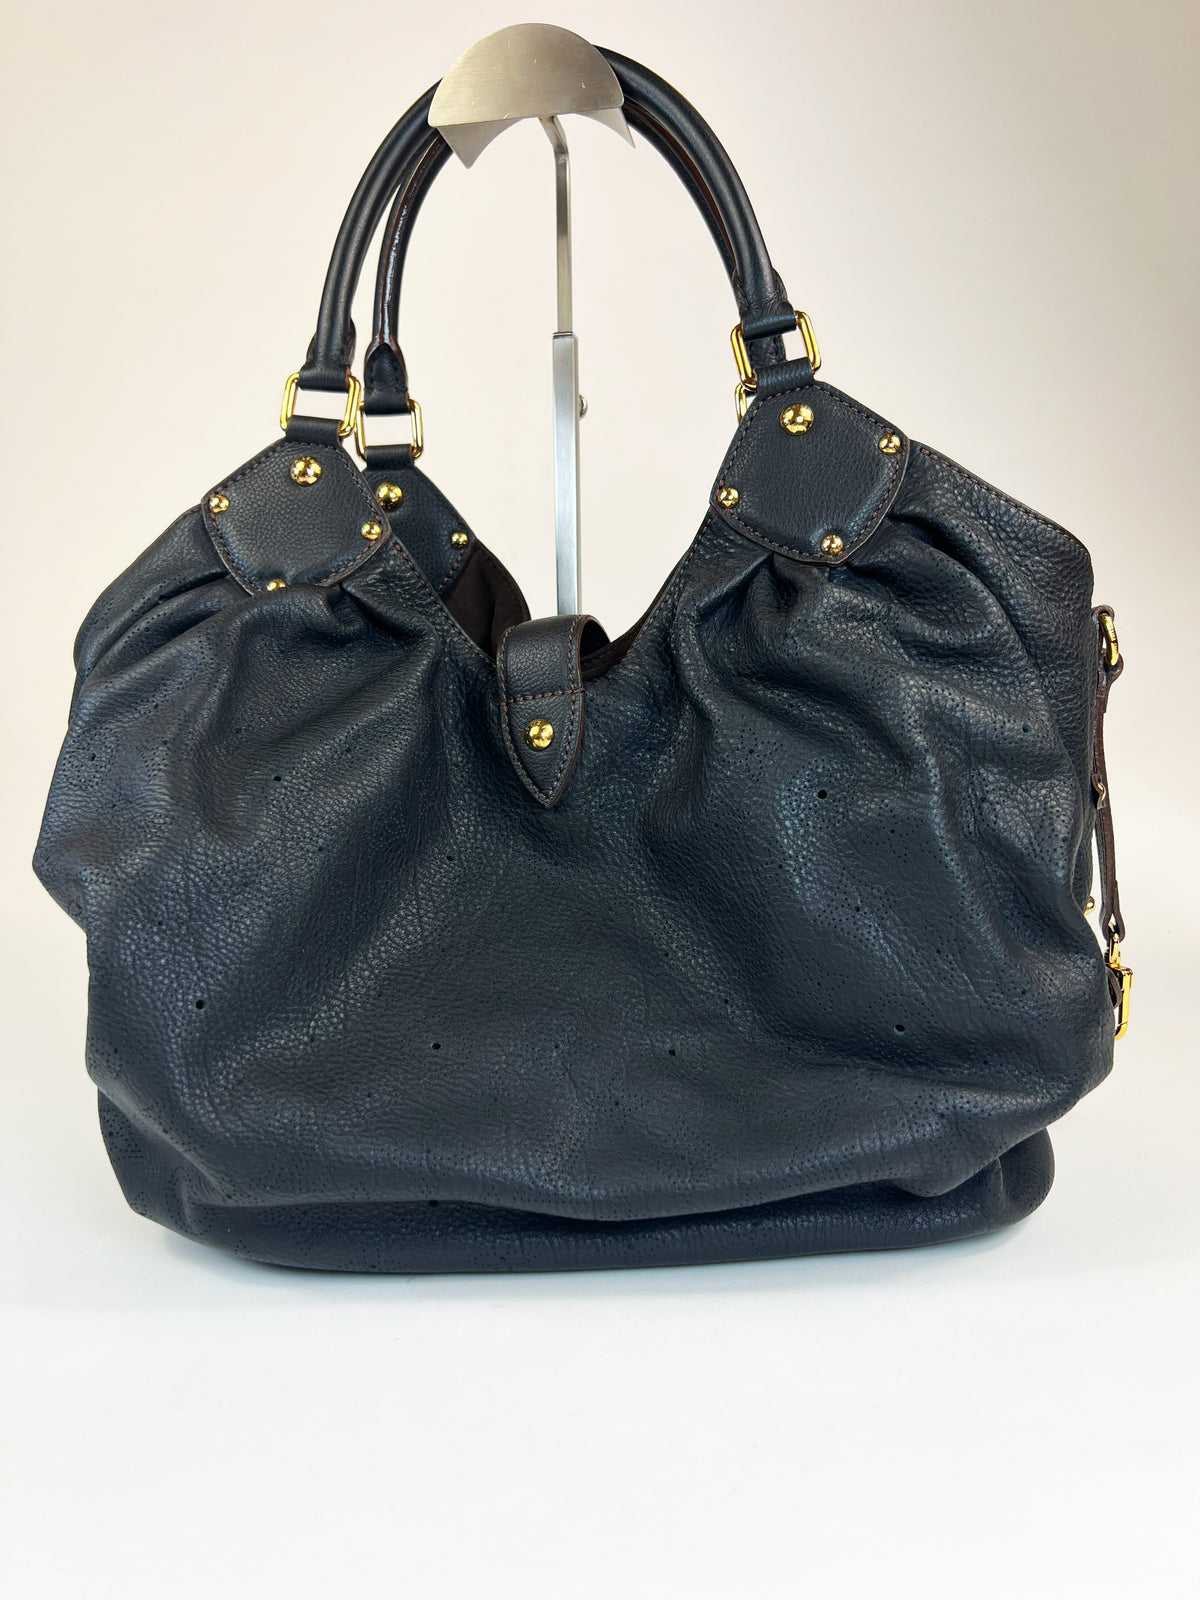 Excellent Pre-Loved Black Grained Leather with Perforated Monogram Pattern Large Tote Bag.(back)